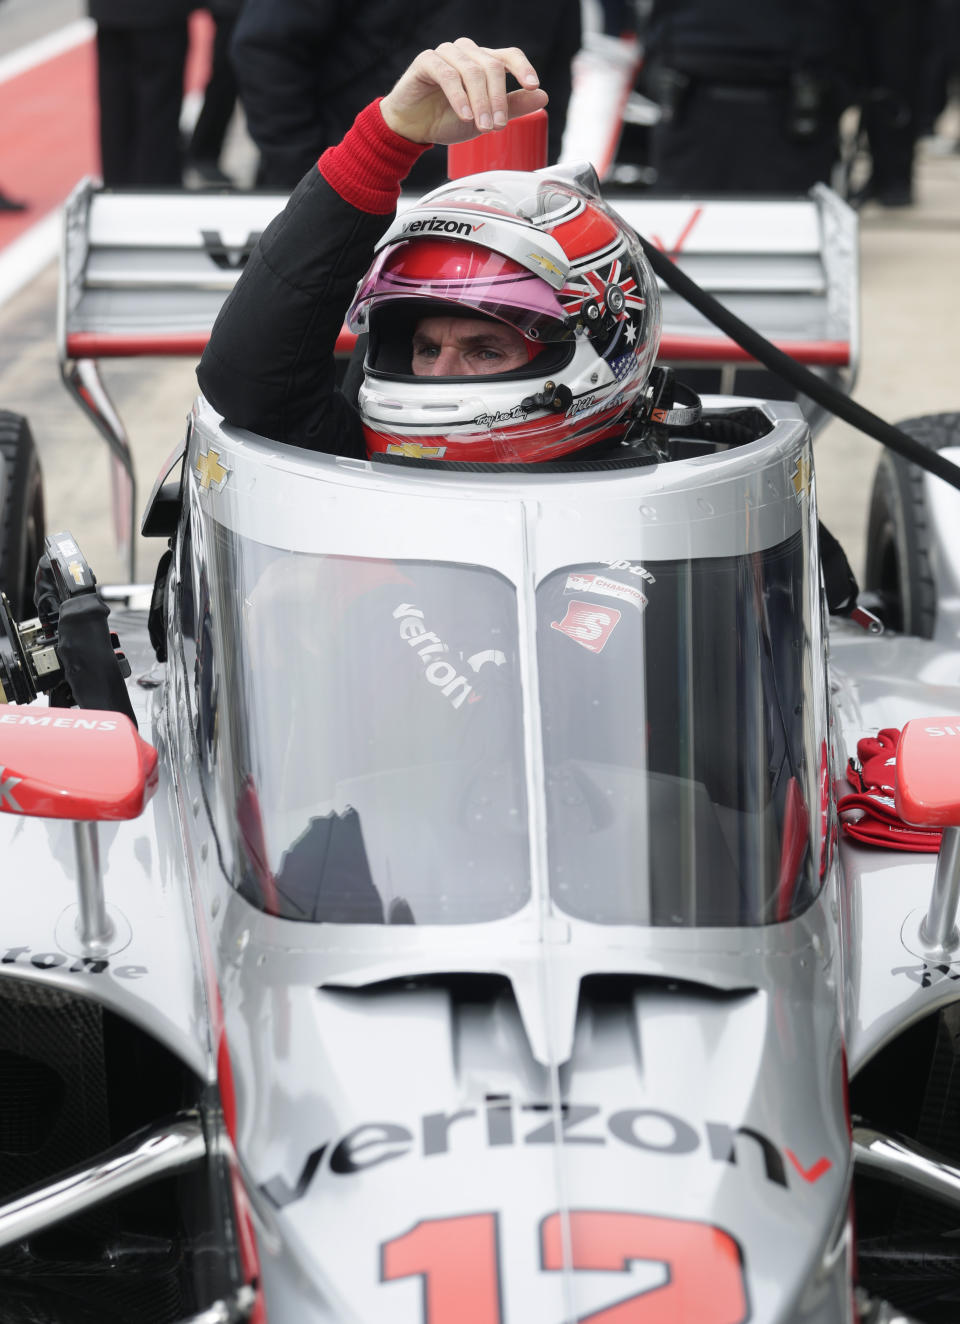 IndyCar driver Will Power lowers into his car as he prepares to drive in IndyCar Series Open Testing, Wednesday, Feb. 12, 2020, in Austin, Texas. (AP Photo/Eric Gay)